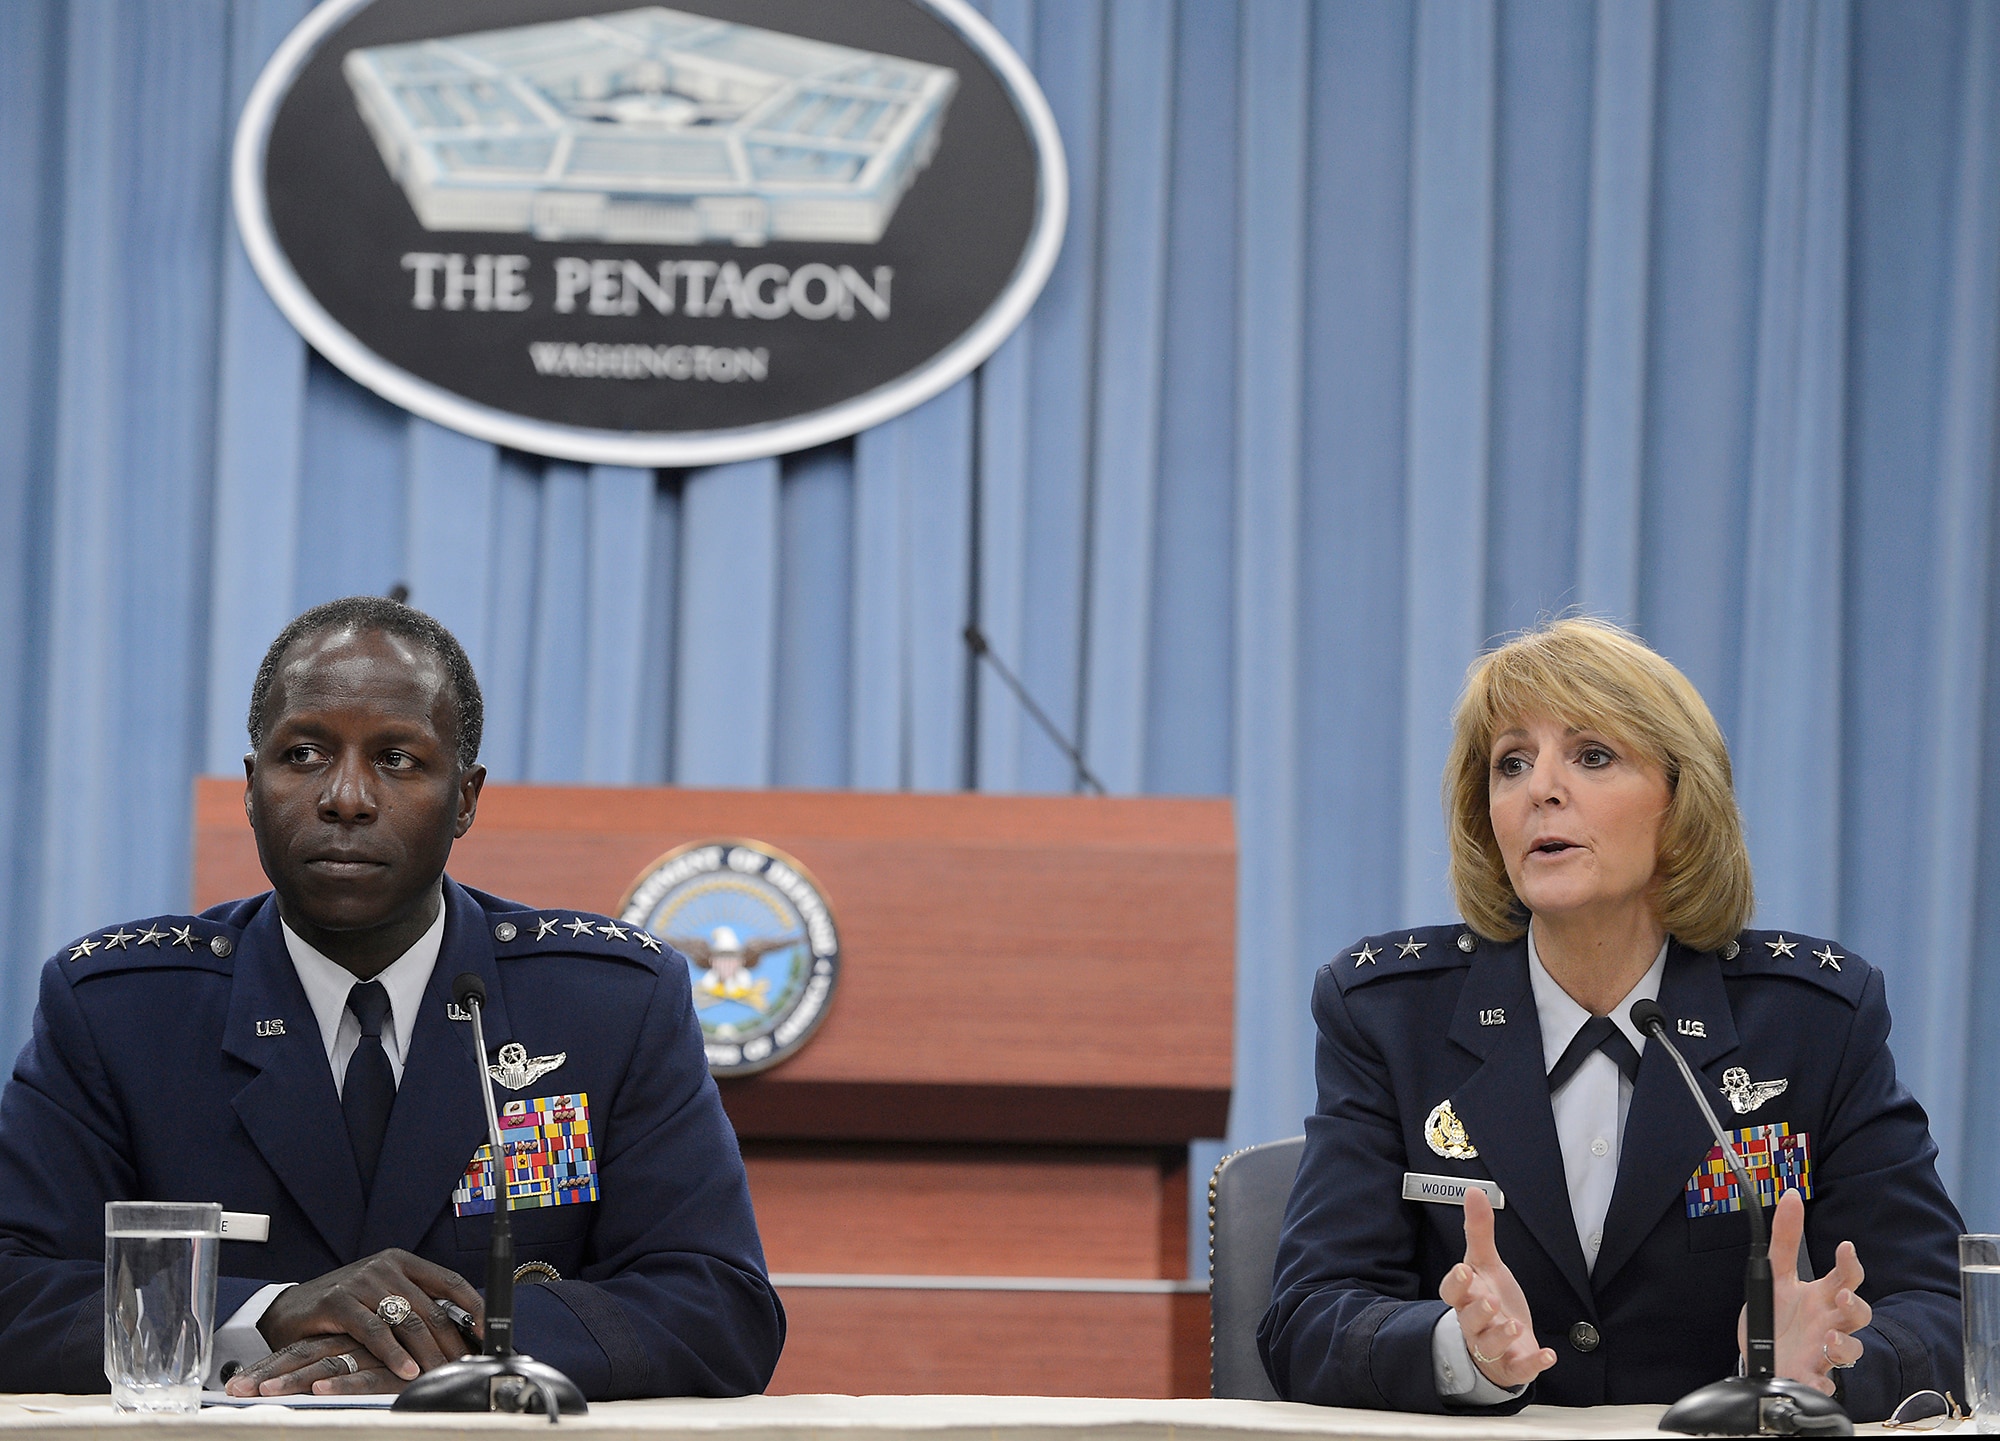 Gen. Edward Rice Jr., commander of Air Education and Training Command, answers questions with Maj. Gen. Margaret Woodward, Air Force Chief of Safety and commander of Air Force Safety Center at Kirtland Air Force Base, N.M., during a Pentagon press briefing on Nov. 14, 2012.  Rice presented the findings relating to Woodward's investigation into allegations of sexual misconduct at Basic Military Training.  (U.S. Air Force photo/Scott M. Ash)